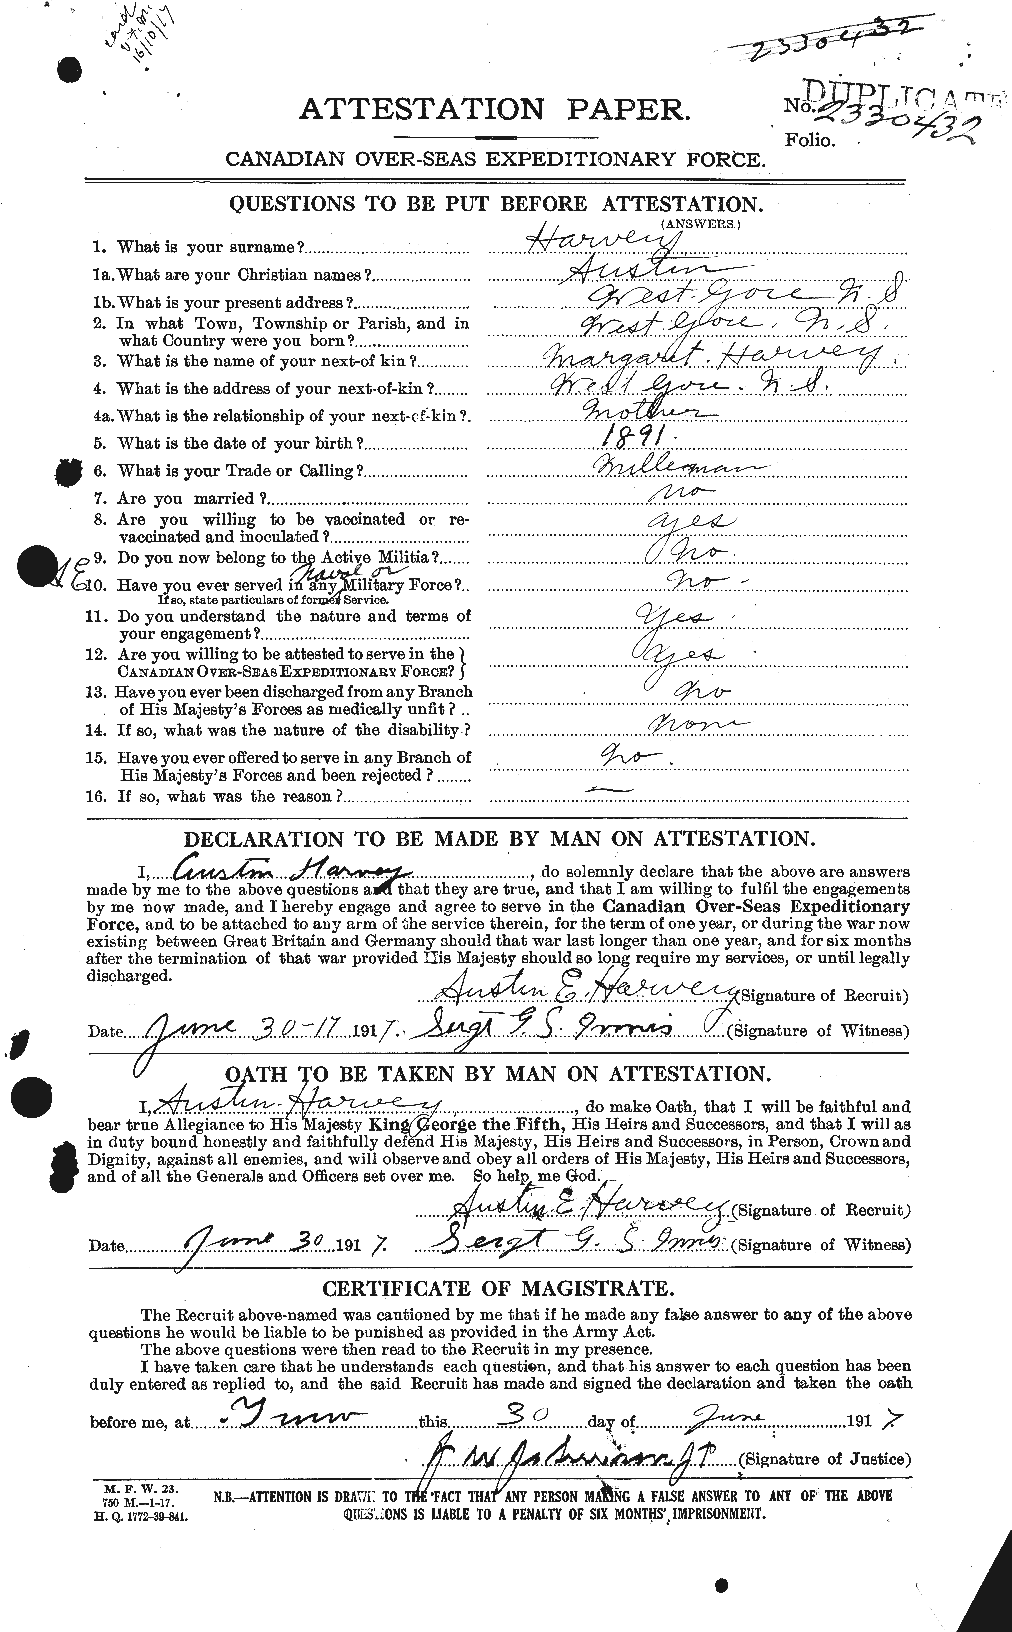 Personnel Records of the First World War - CEF 382533a